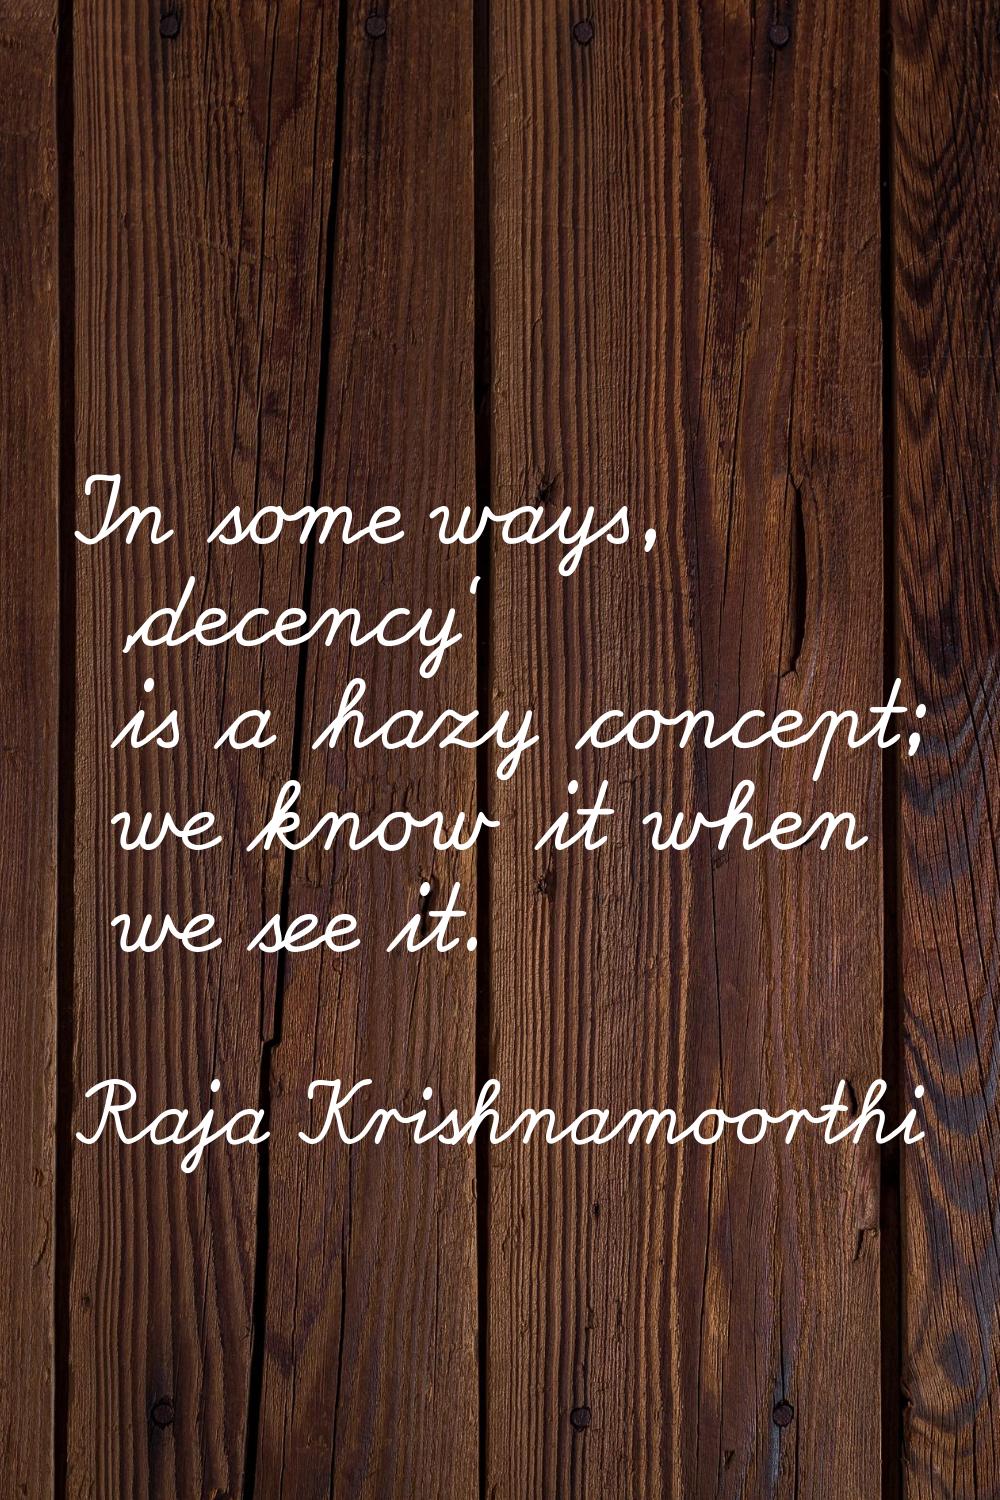 In some ways, 'decency' is a hazy concept; we know it when we see it.